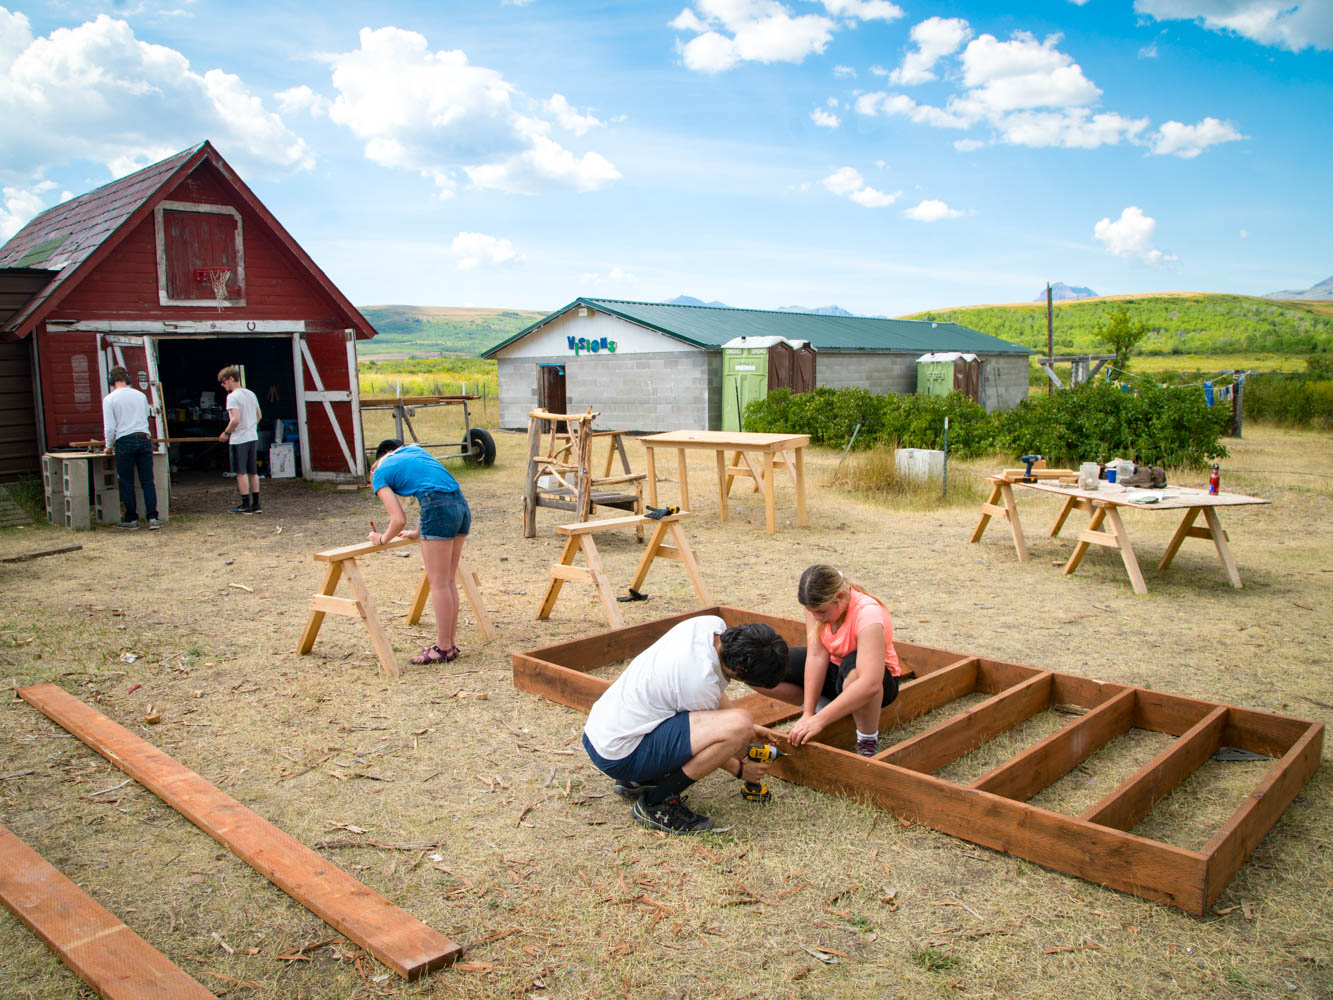 VISIONS participants taking on carpentry projects at the ranch on the Blackfeet Reservation.